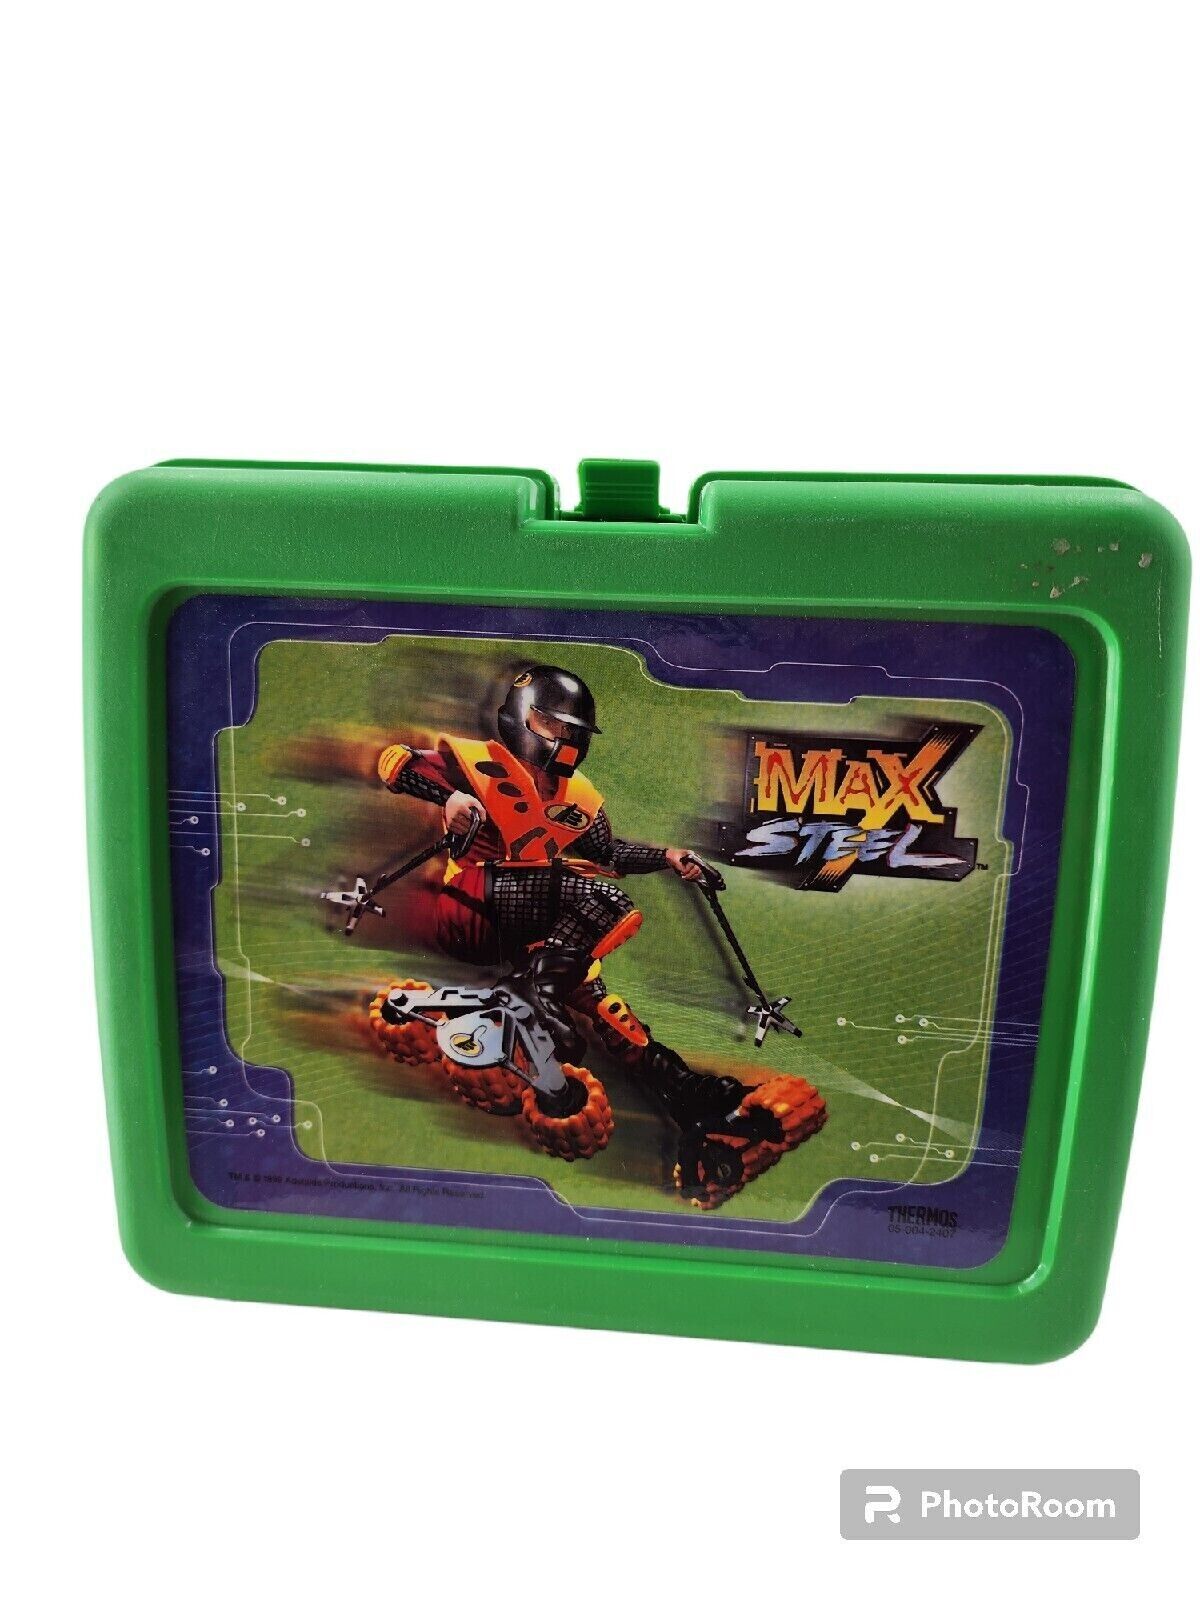 Max Steel Vintage Plastic Lunch box NO Thermos 1999